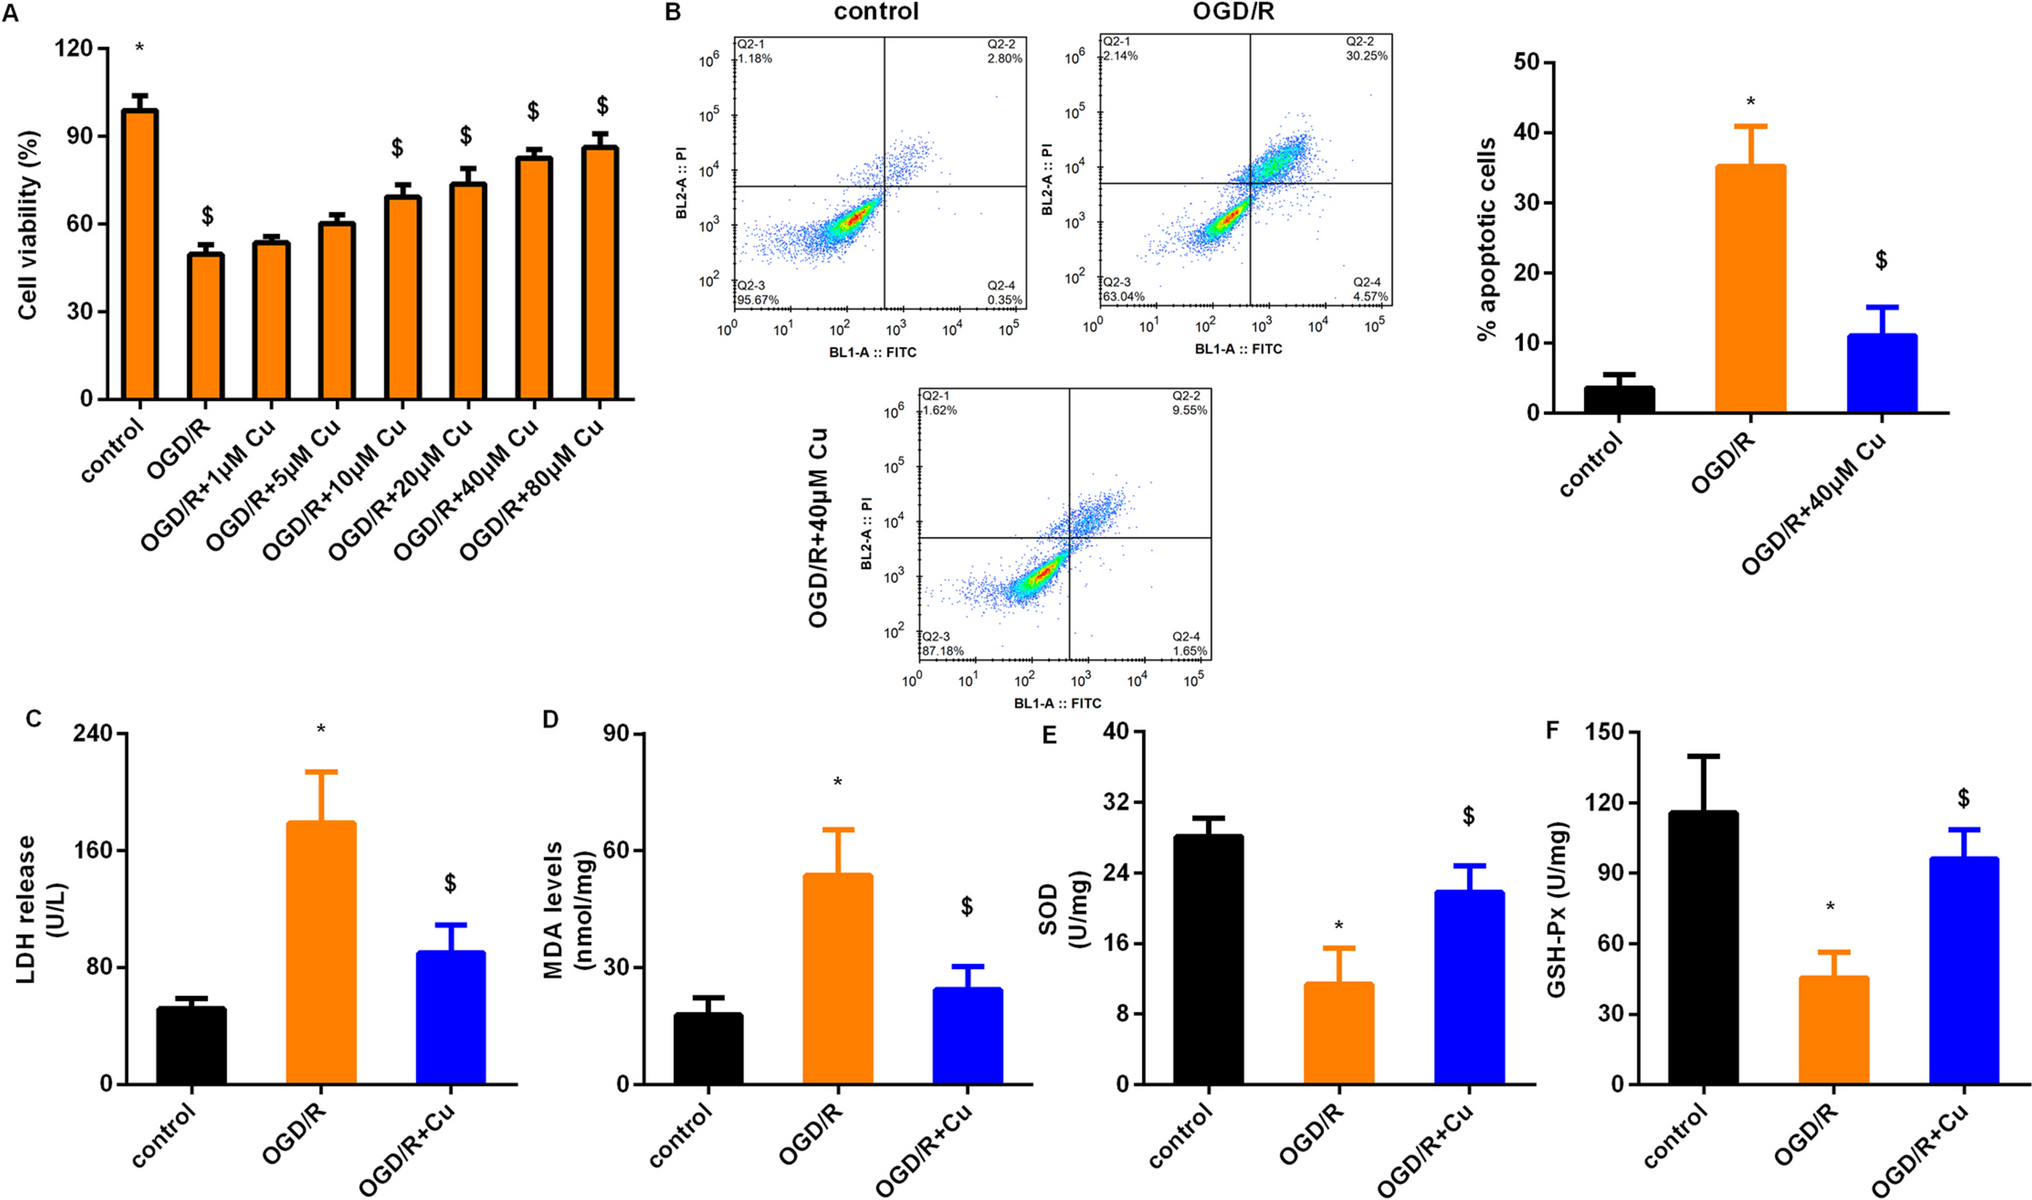 Administration with curcumin alleviates spinal cord ischemia-reperfusion injury by regulating anti-oxidative stress and microglia activation-mediated neuroinflammation via Nrf2/NF-κB axis